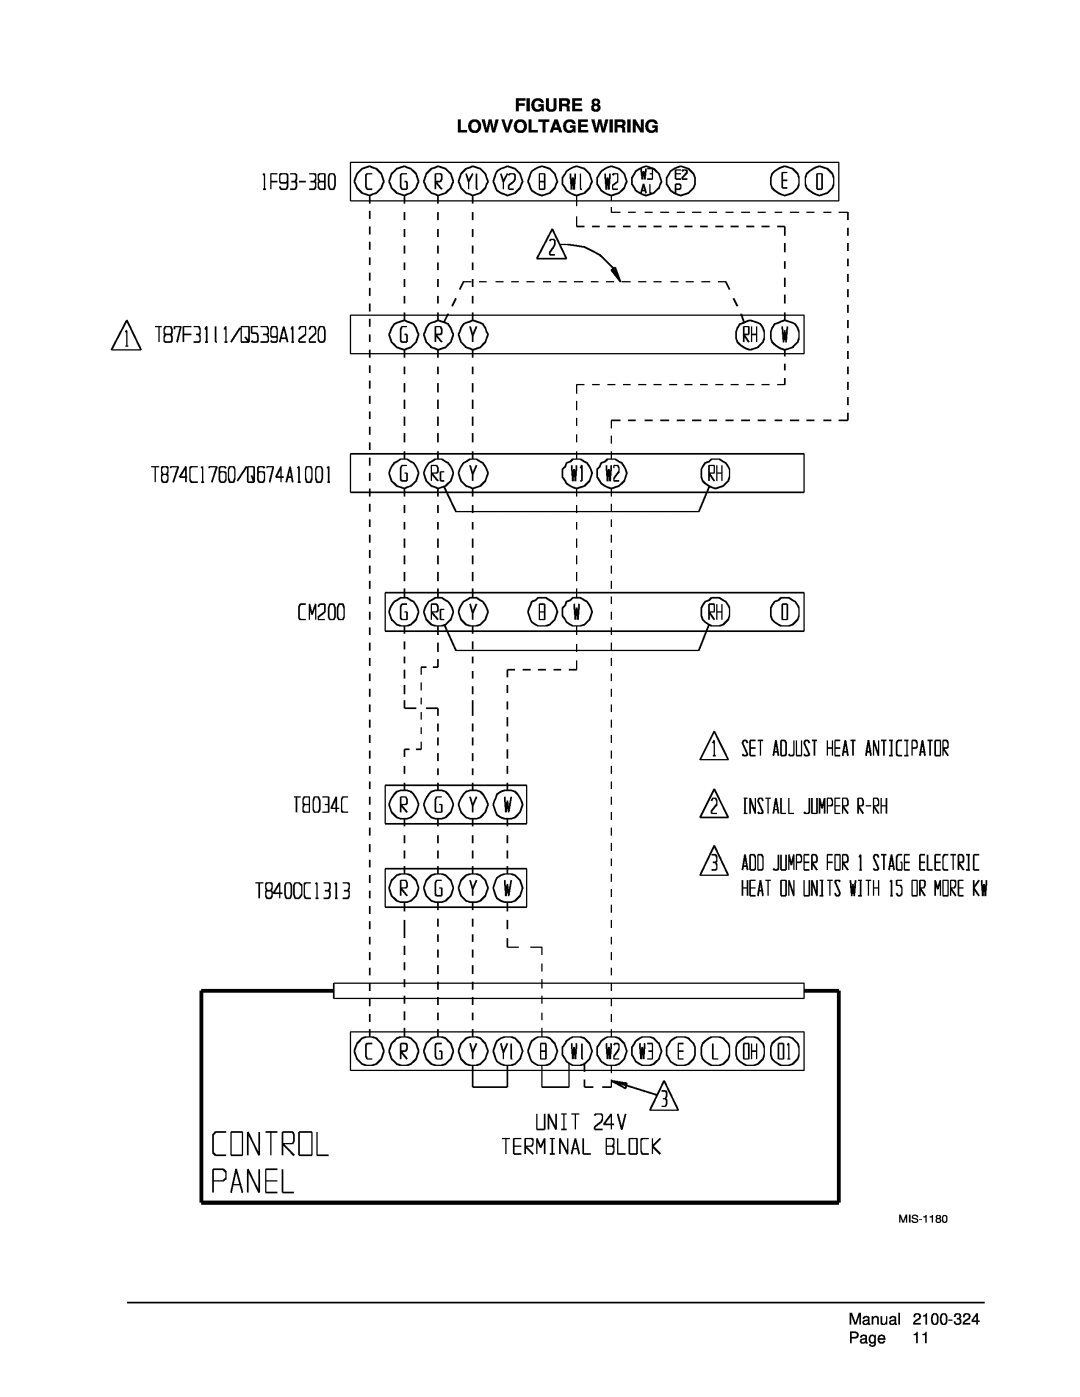 Bard P1142A3, P1148A1, P1060A1 installation instructions Figure Low Voltage Wiring, MIS-1180 